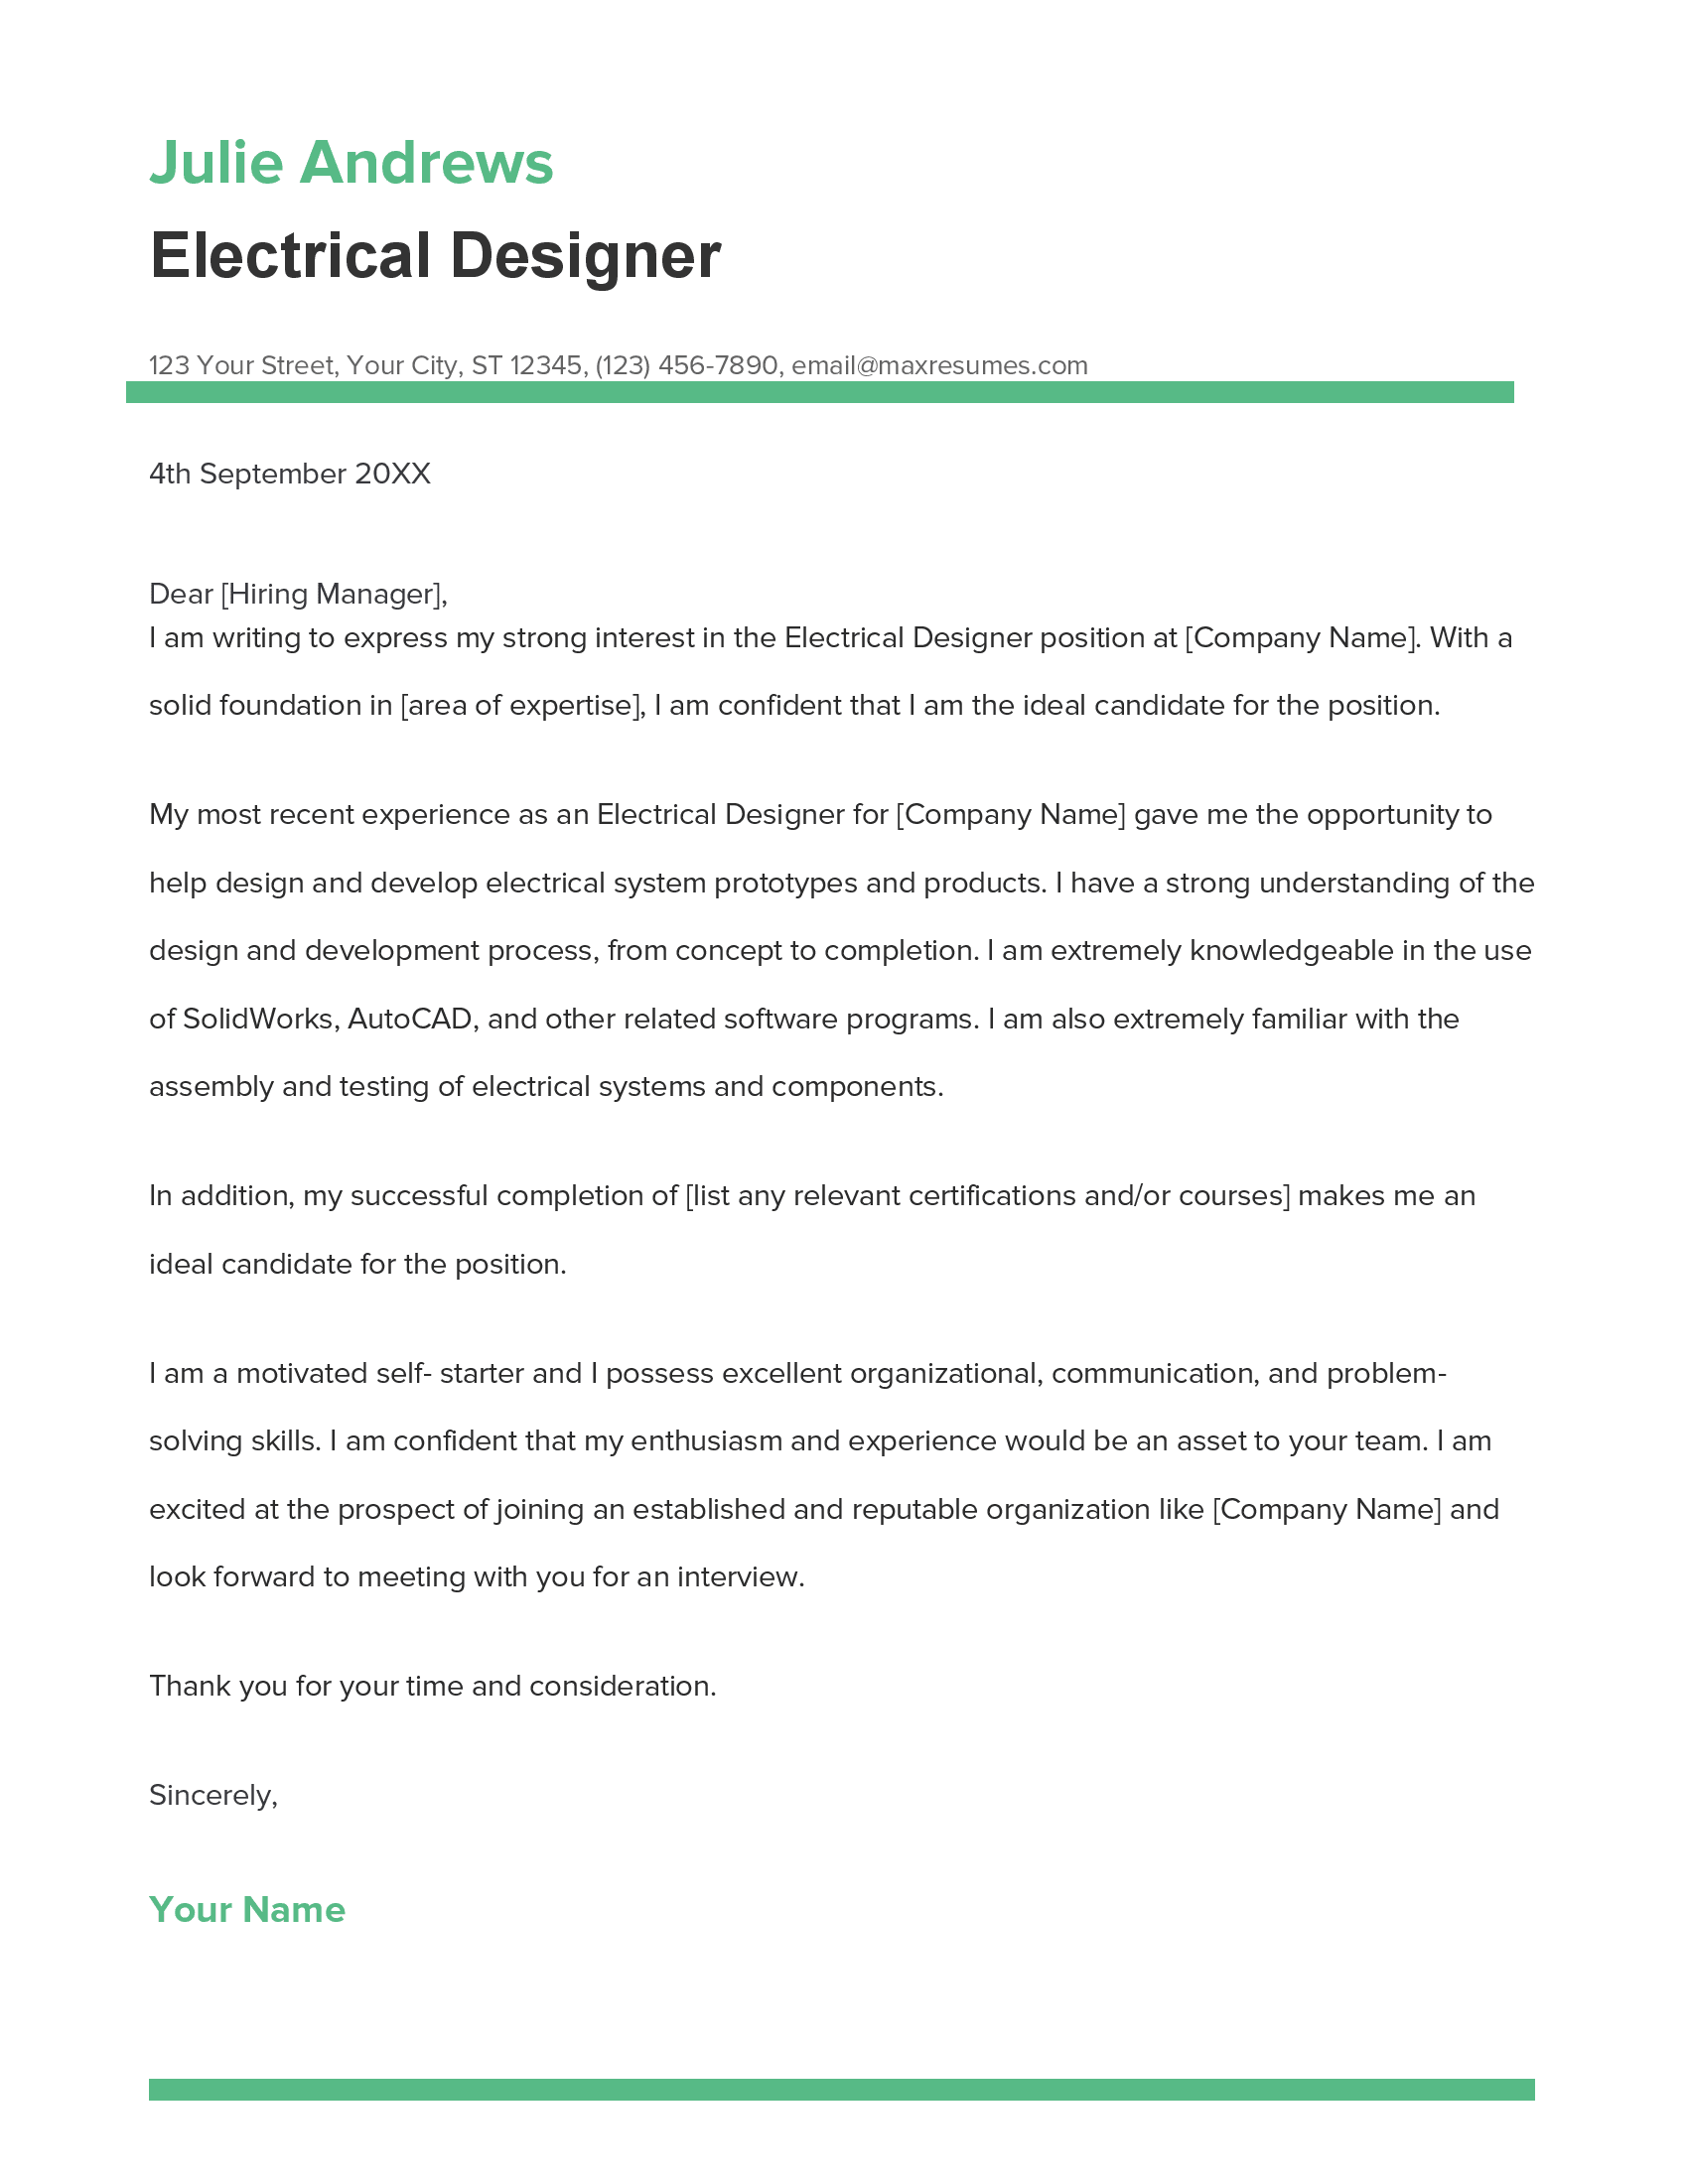 Electrical Designer Cover Letter Example